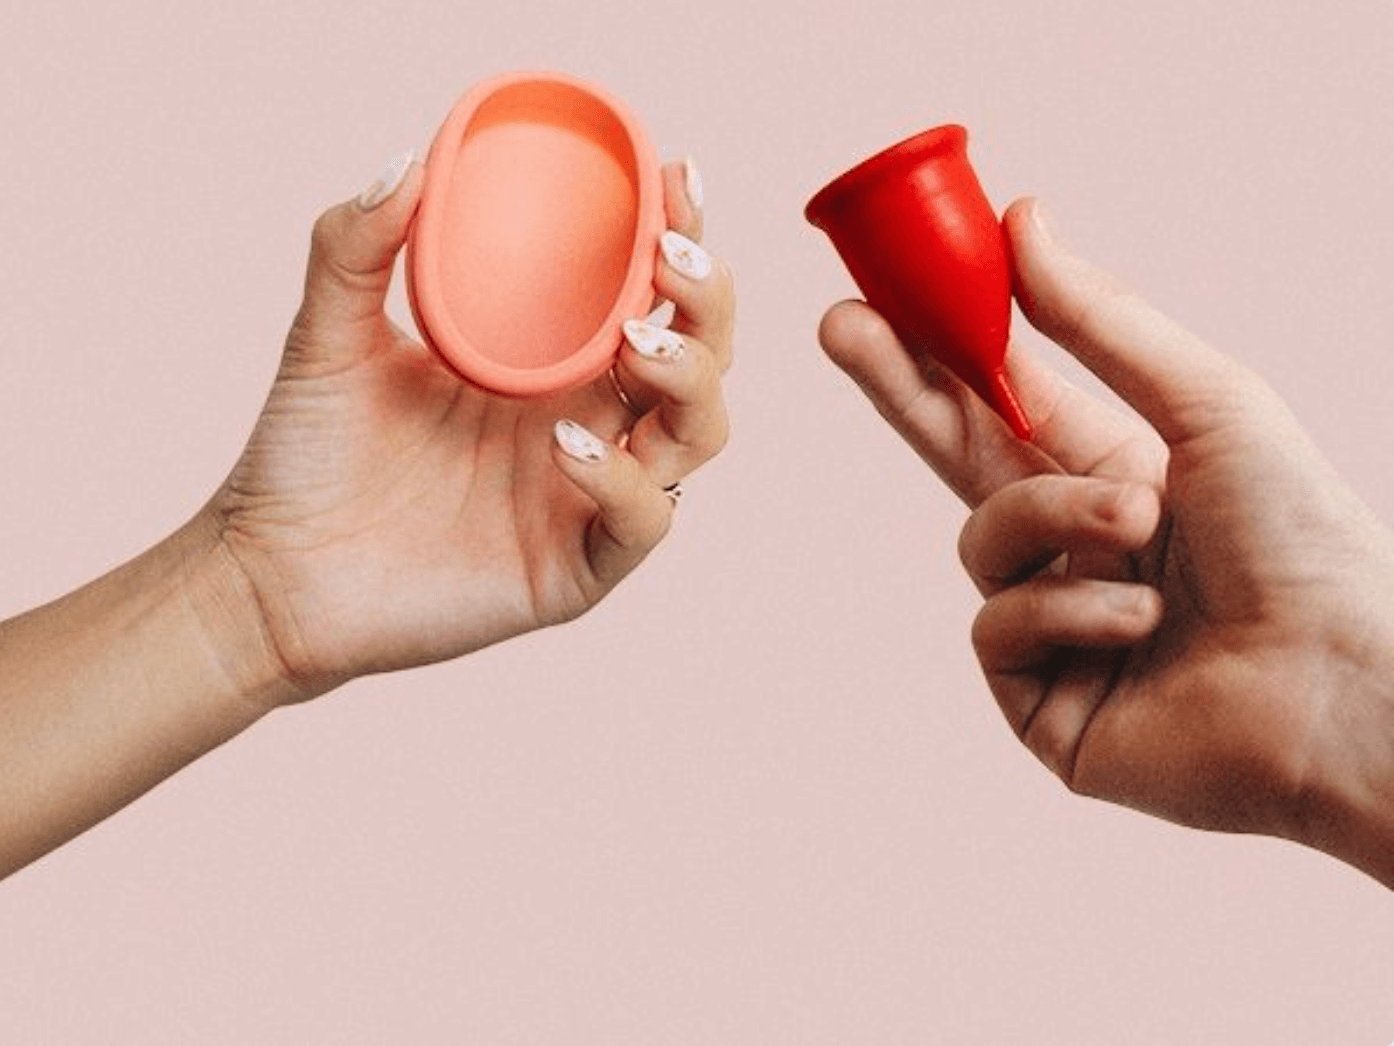 How Does A Period Cup Work?